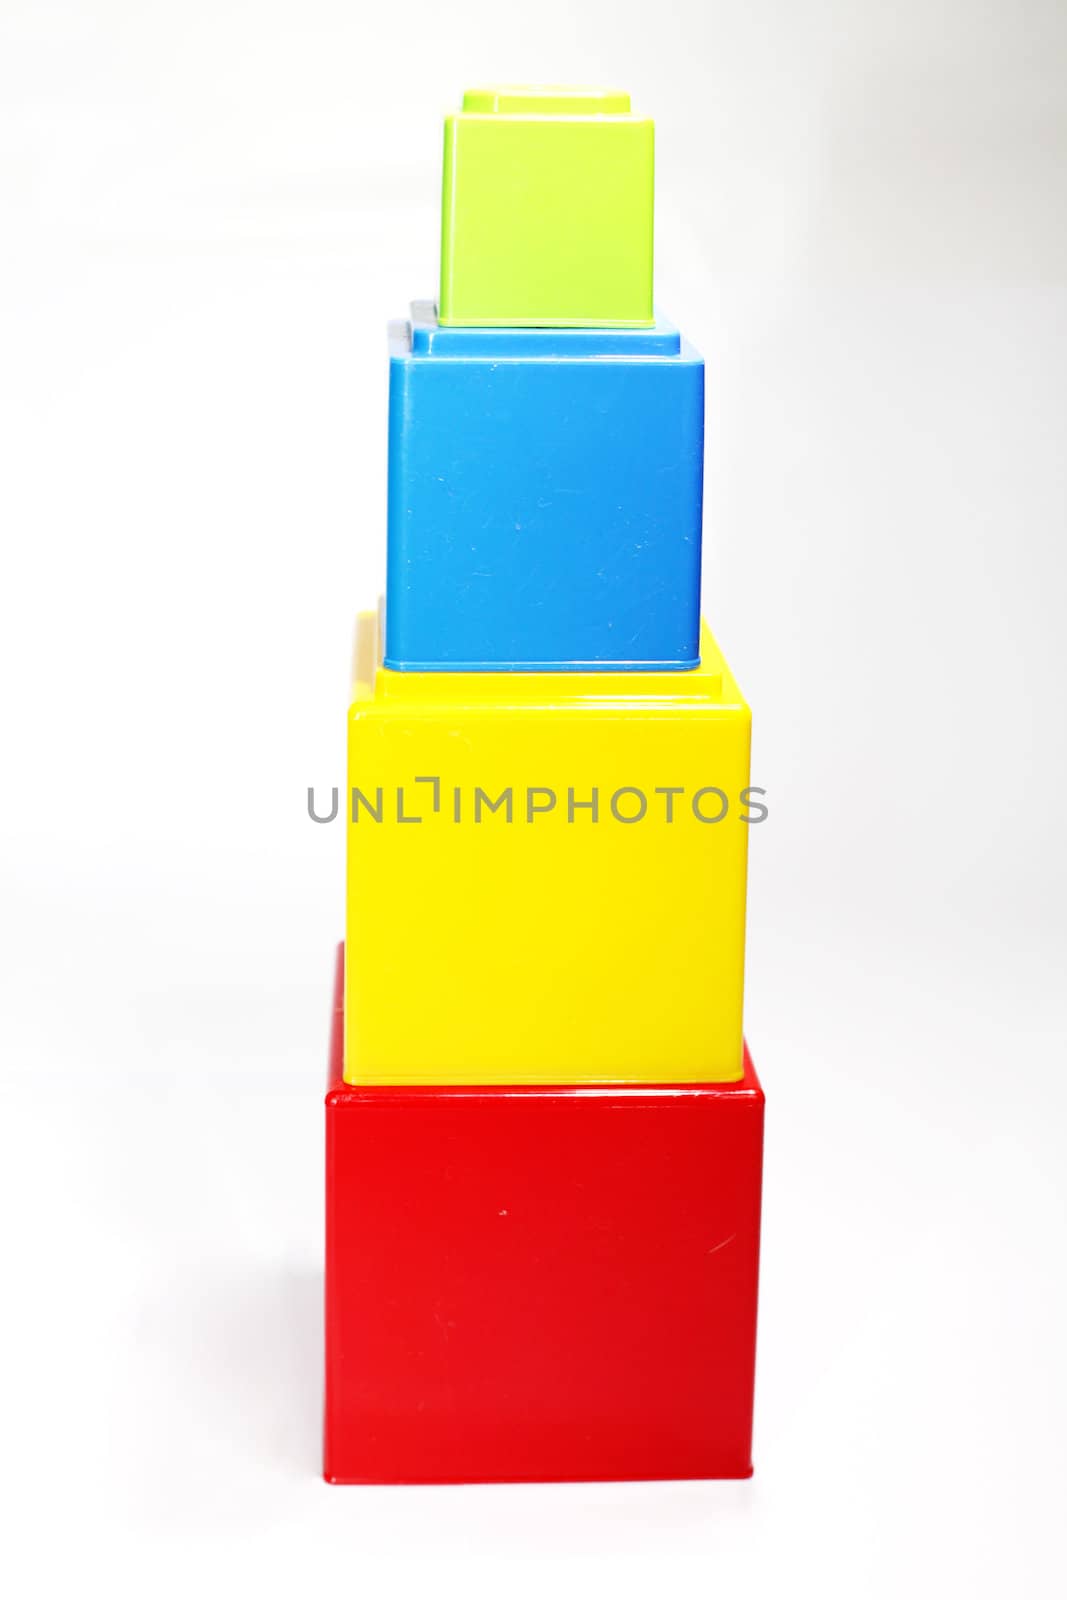 tower made of colorful plastic cubes